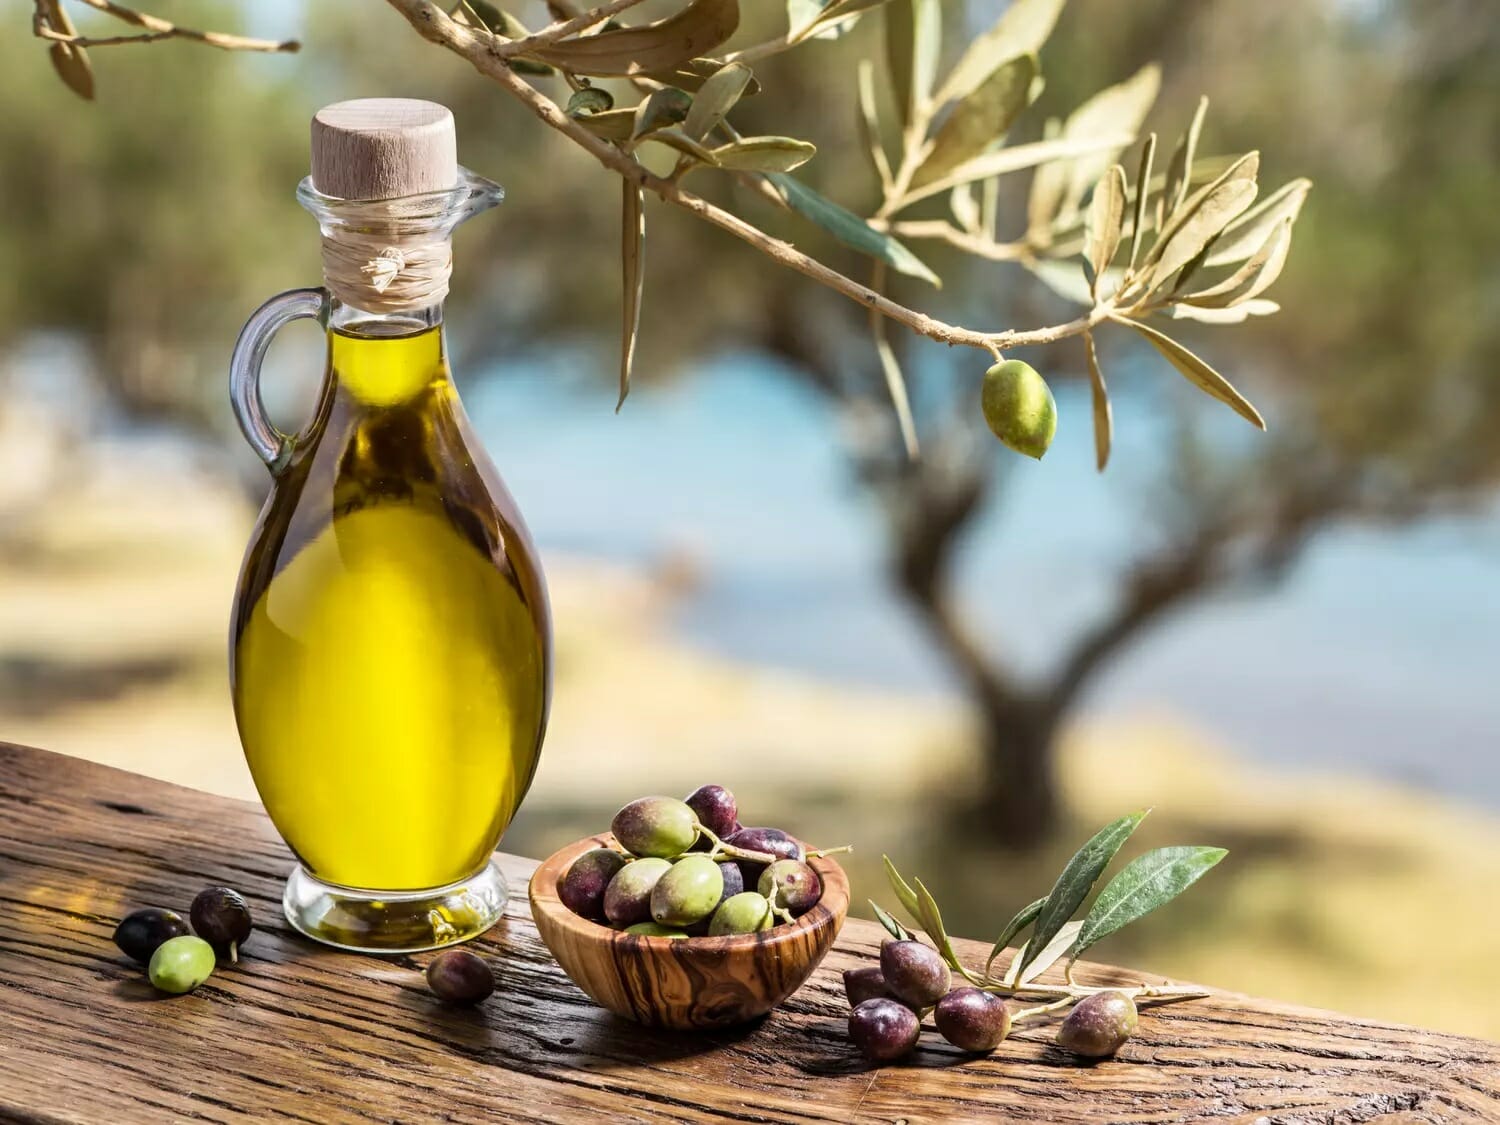 Olive oil is healthy and a good choice for cooking